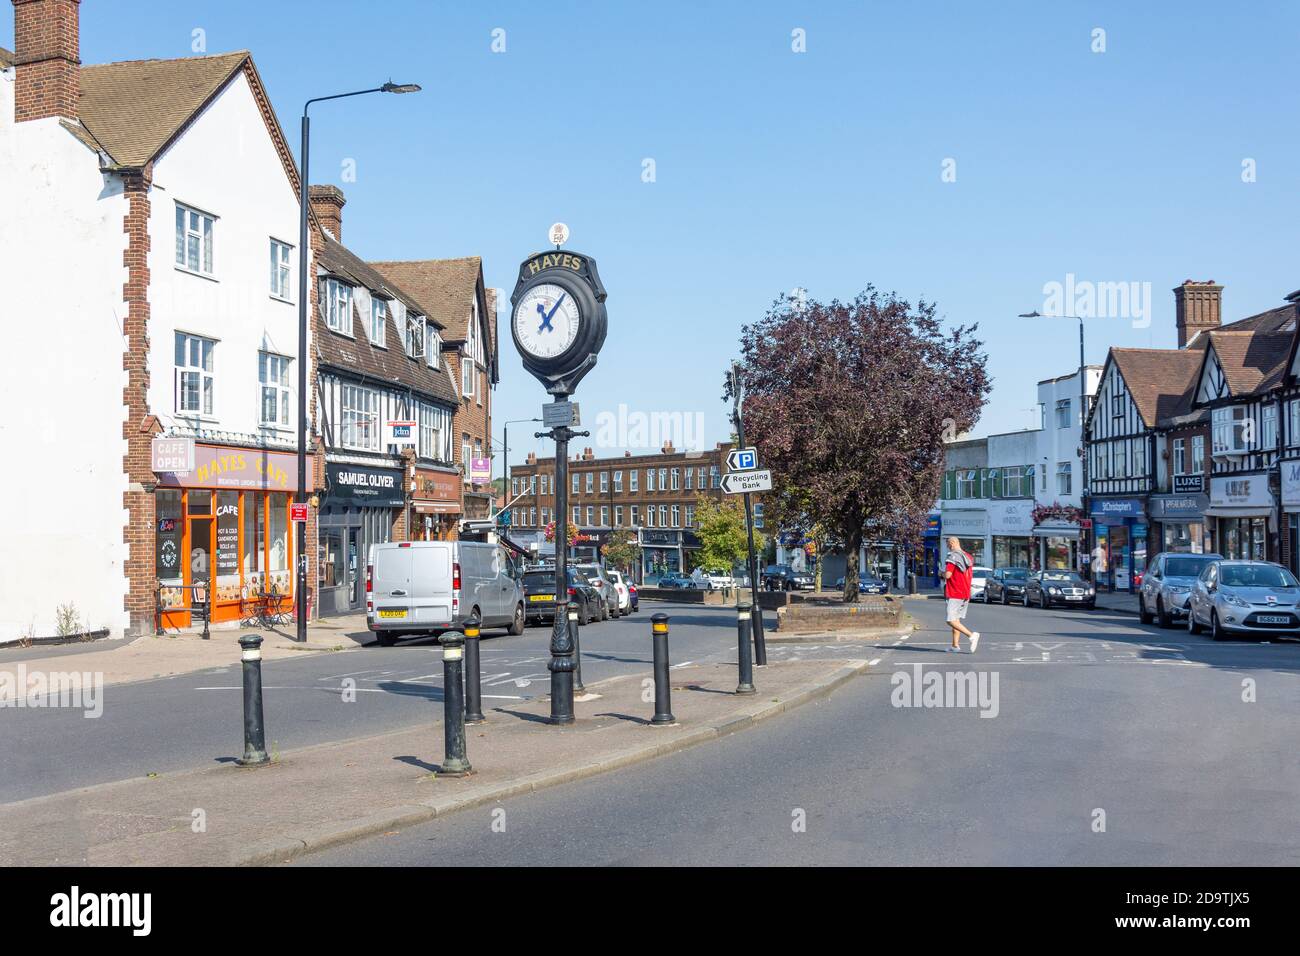 Station Approach, Hayes, London Borough of Bromley, Greater London, England, United Kingdom Stock Photo